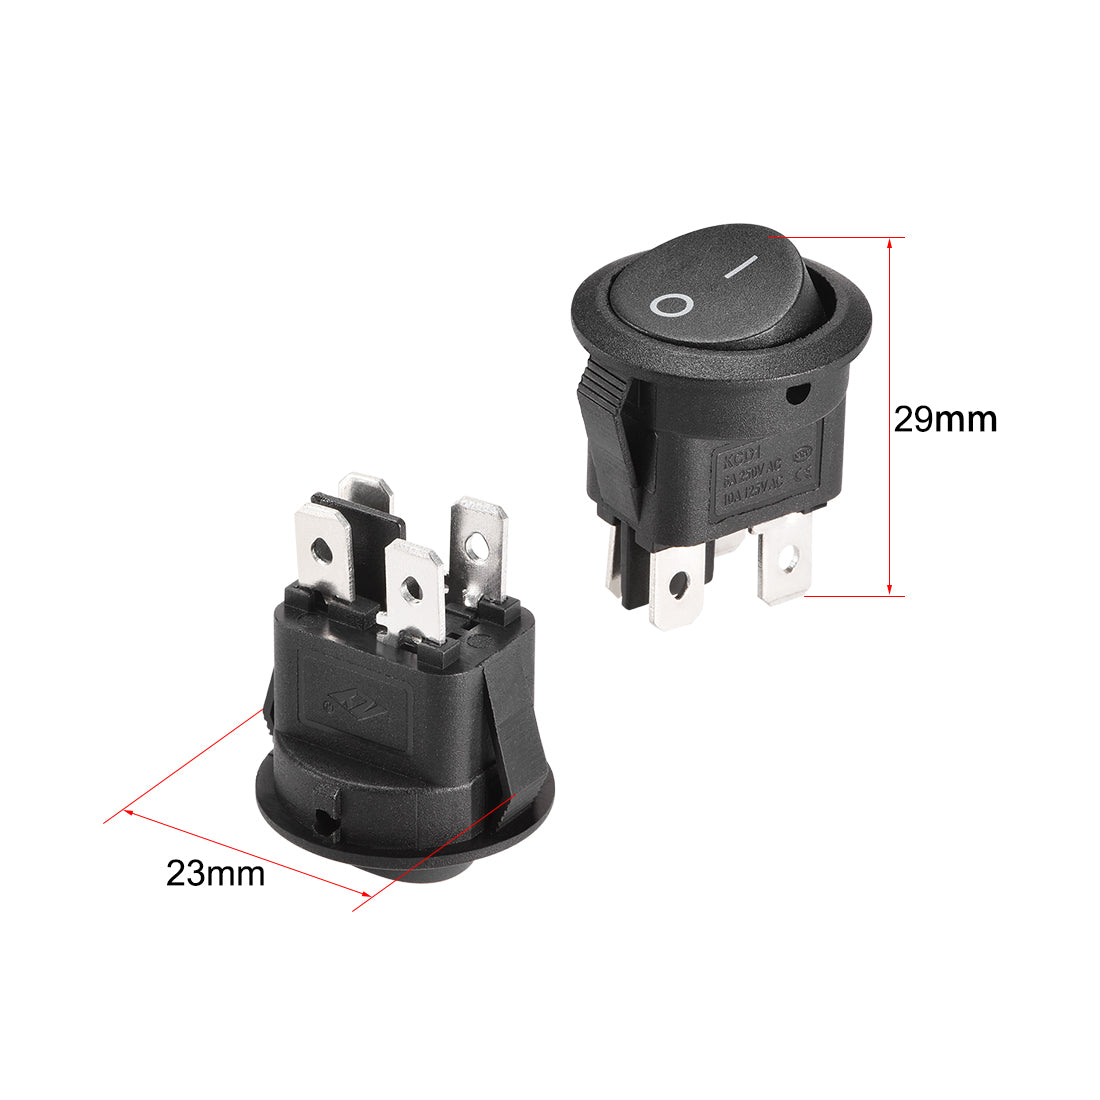 uxcell Uxcell Boat Rocker Switch Round Toggle Switch for Boat Car Marine 4pins ON/OFF AC250V/6A 125V/10A 2pcs